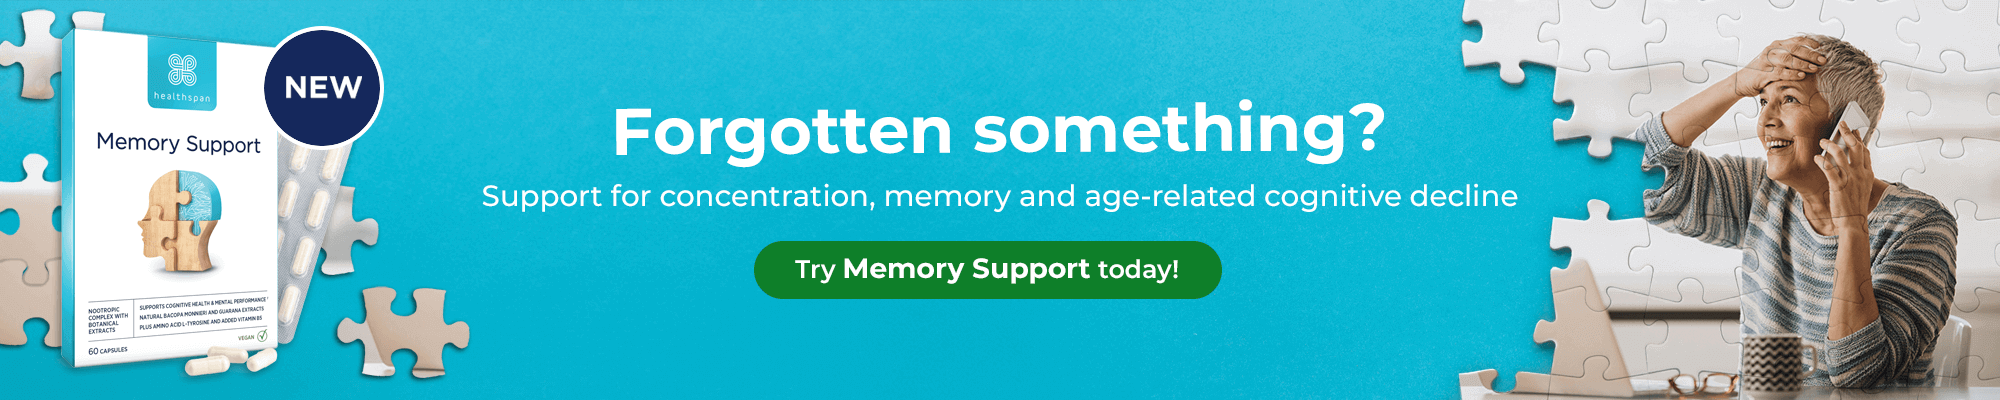 Memory Support - Forgotten something? Support for age-related cognitive decline. Buy now.